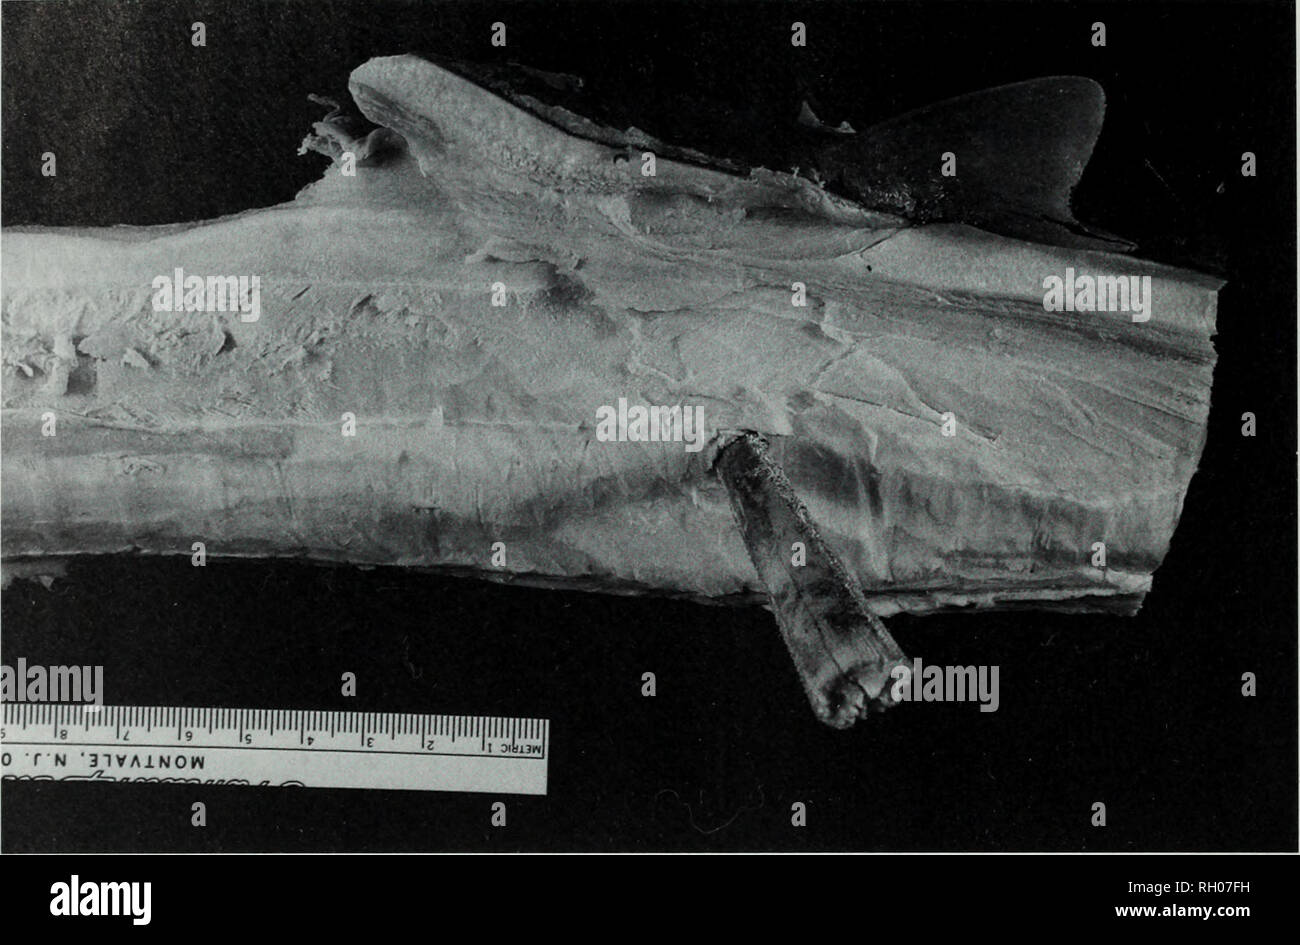 . Bulletin. Science. 118 SOUTHERN CALIFORNIA ACADEMY OF SCIENCES. Fig. 1. Vertebral segment at level of second dorsal fin of Isurus oxyrinchus (SIO 94-4) with embedded rostral fragment of Makaira nigricans. Rostrum morphology suggests the blue marlin was similar in size to Los An- geles County Museum specimen LACM 25491, i.e. slightly less than 44 kg and 173 cm lower jaw to fork length. Blue marlin of this small size would be an immature fish (Hopper 1986). To obtain an estimate of total length (TL) of the mako shark, we used several morphometric conversion equations developed from second dors Stock Photo